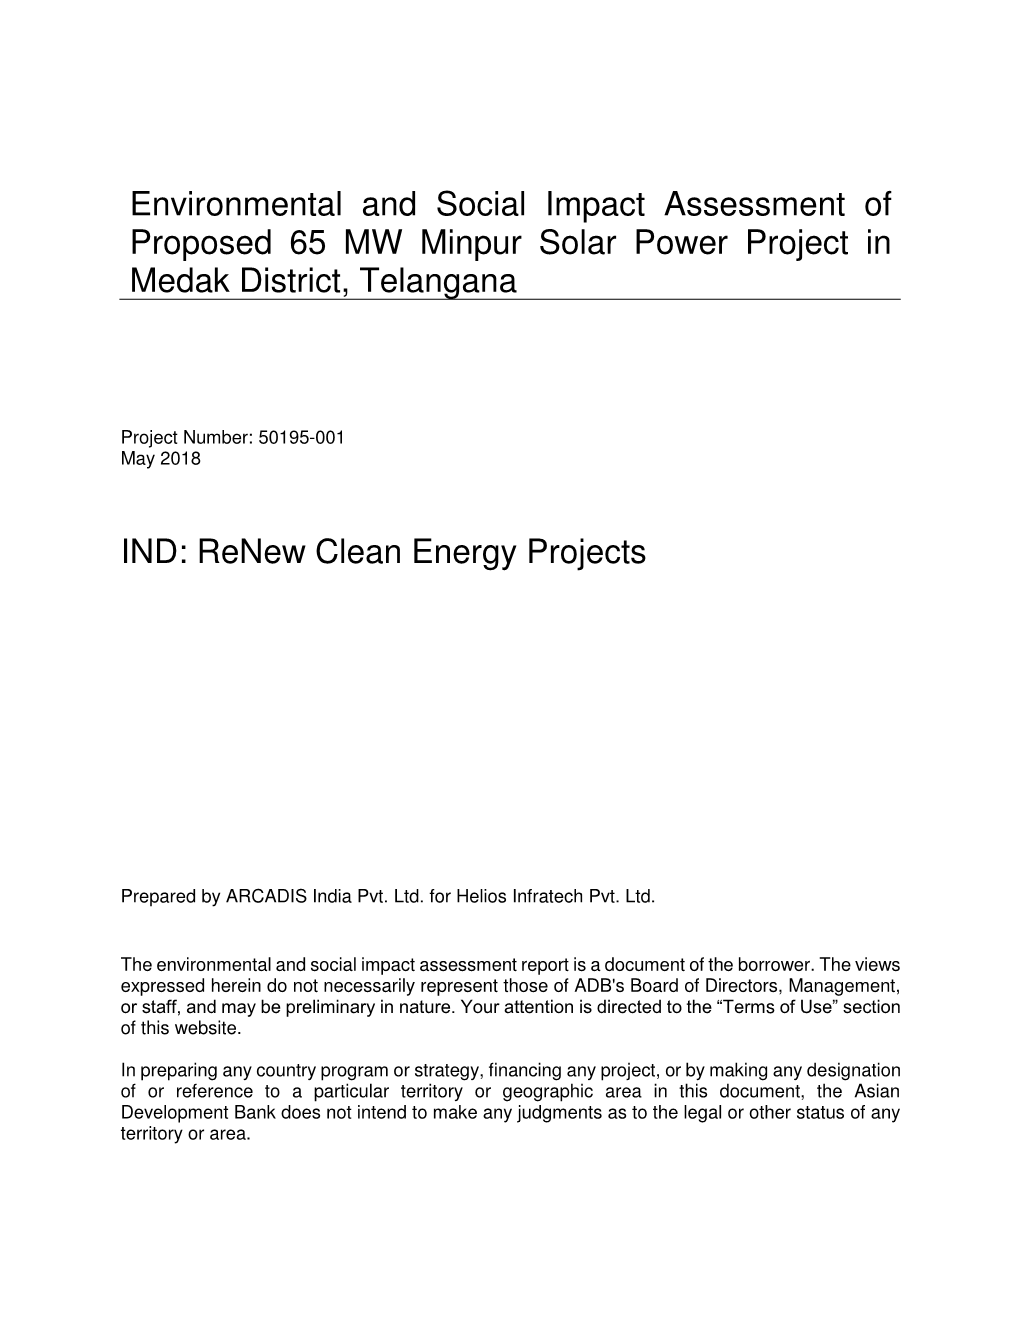 Renew Clean Energy Projects